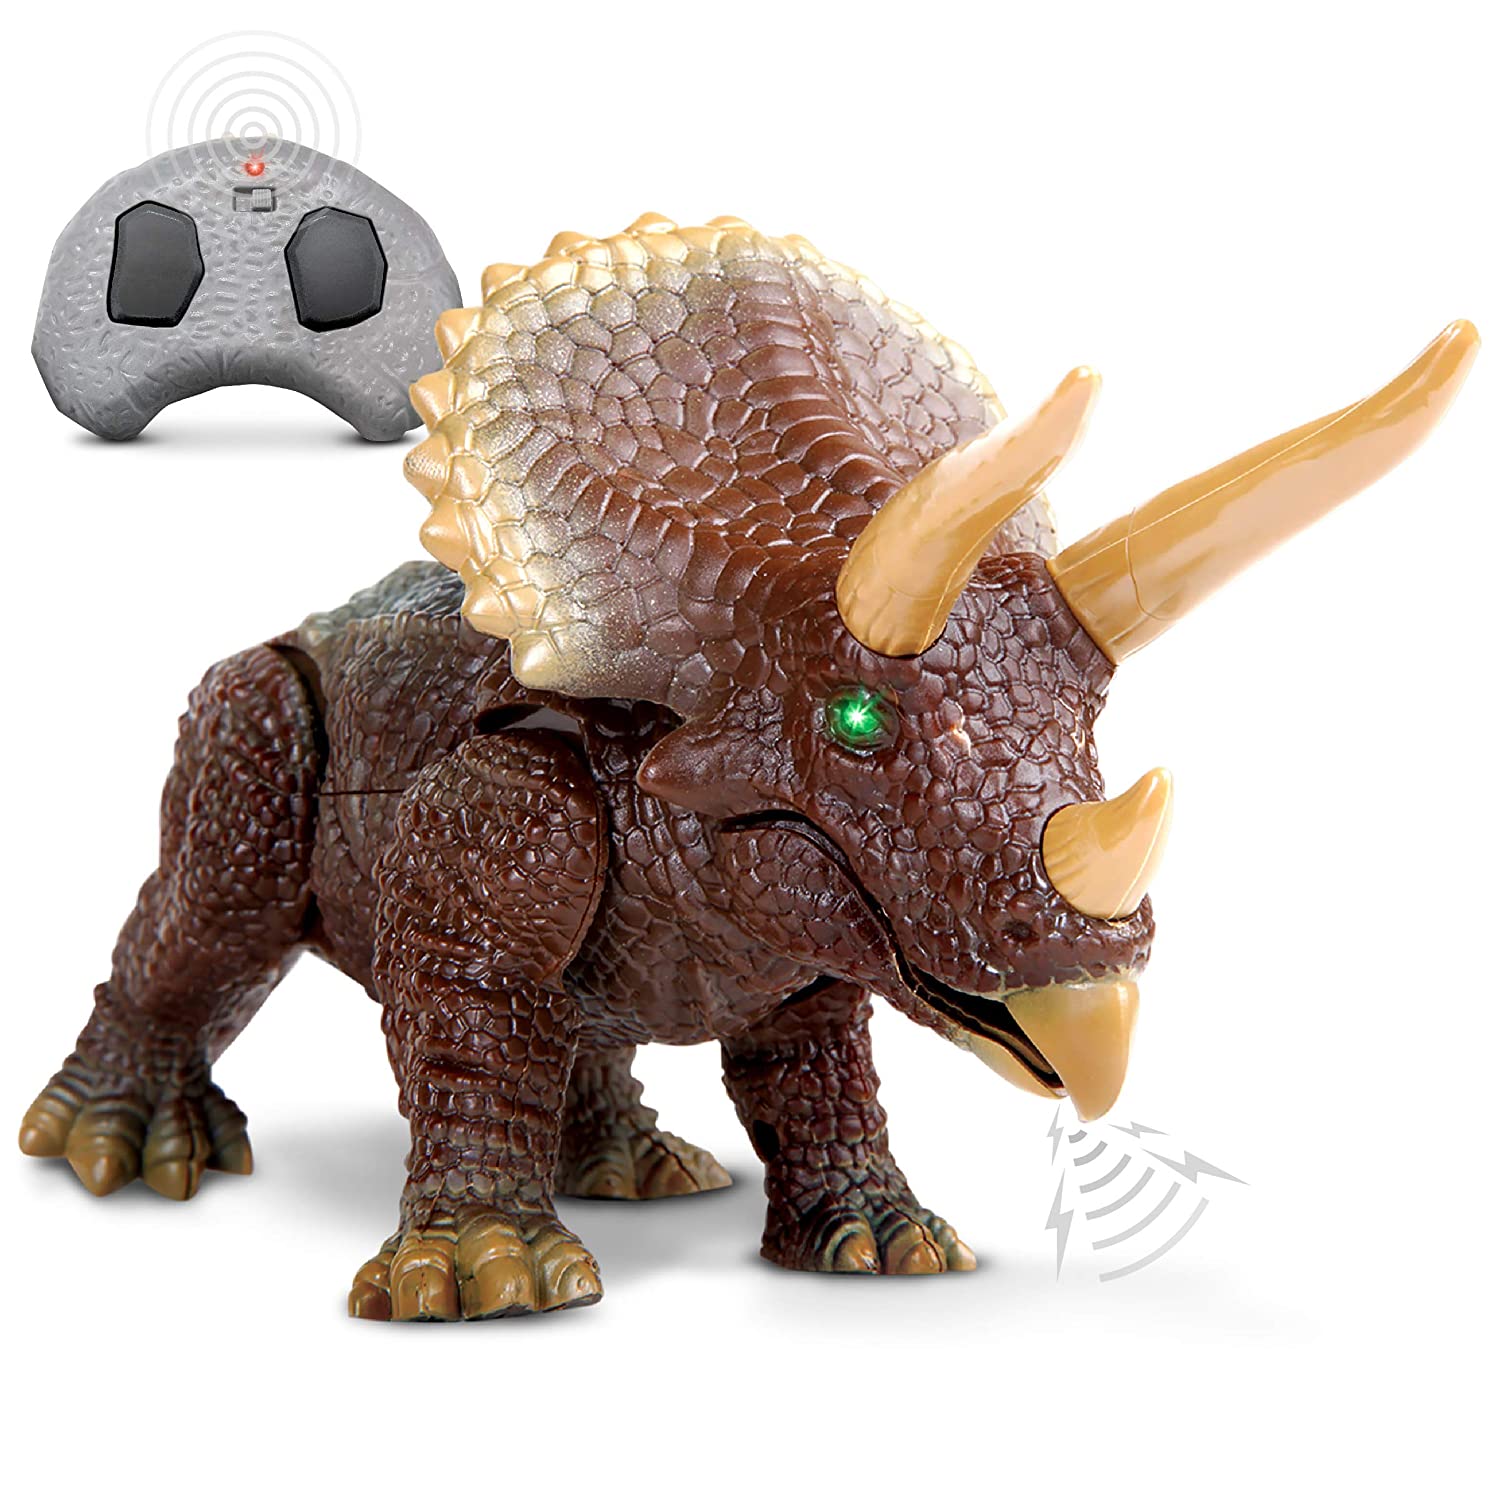 Top 7 Best Robot Dinosaur Toys Reviews in 2022 2